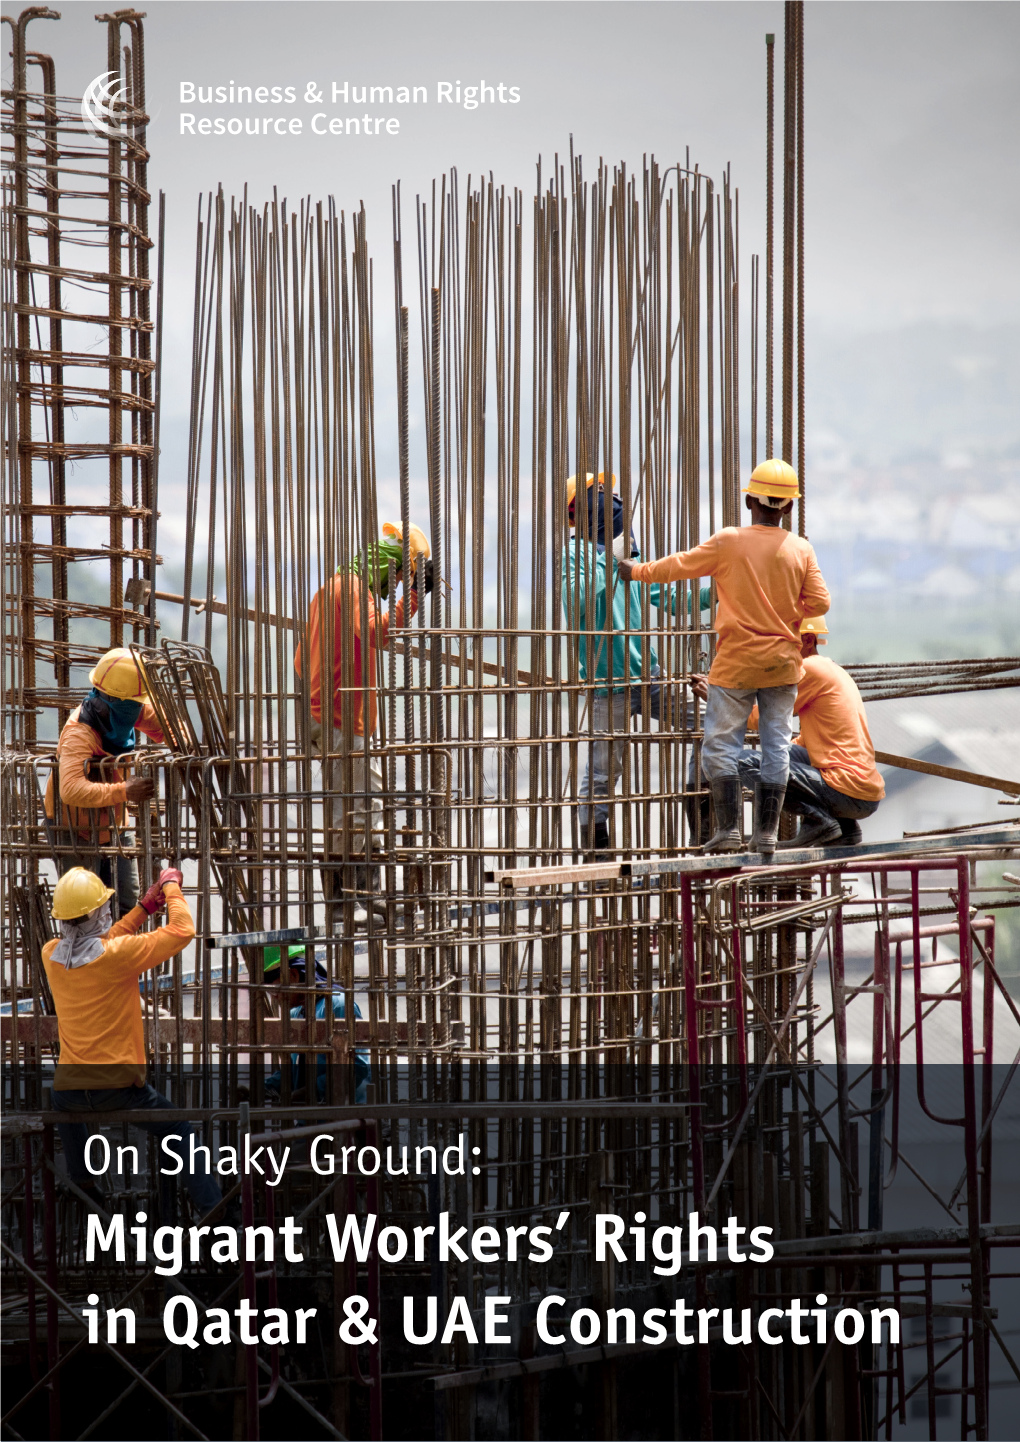 Migrant Workers' Rights in Qatar & UAE Construction